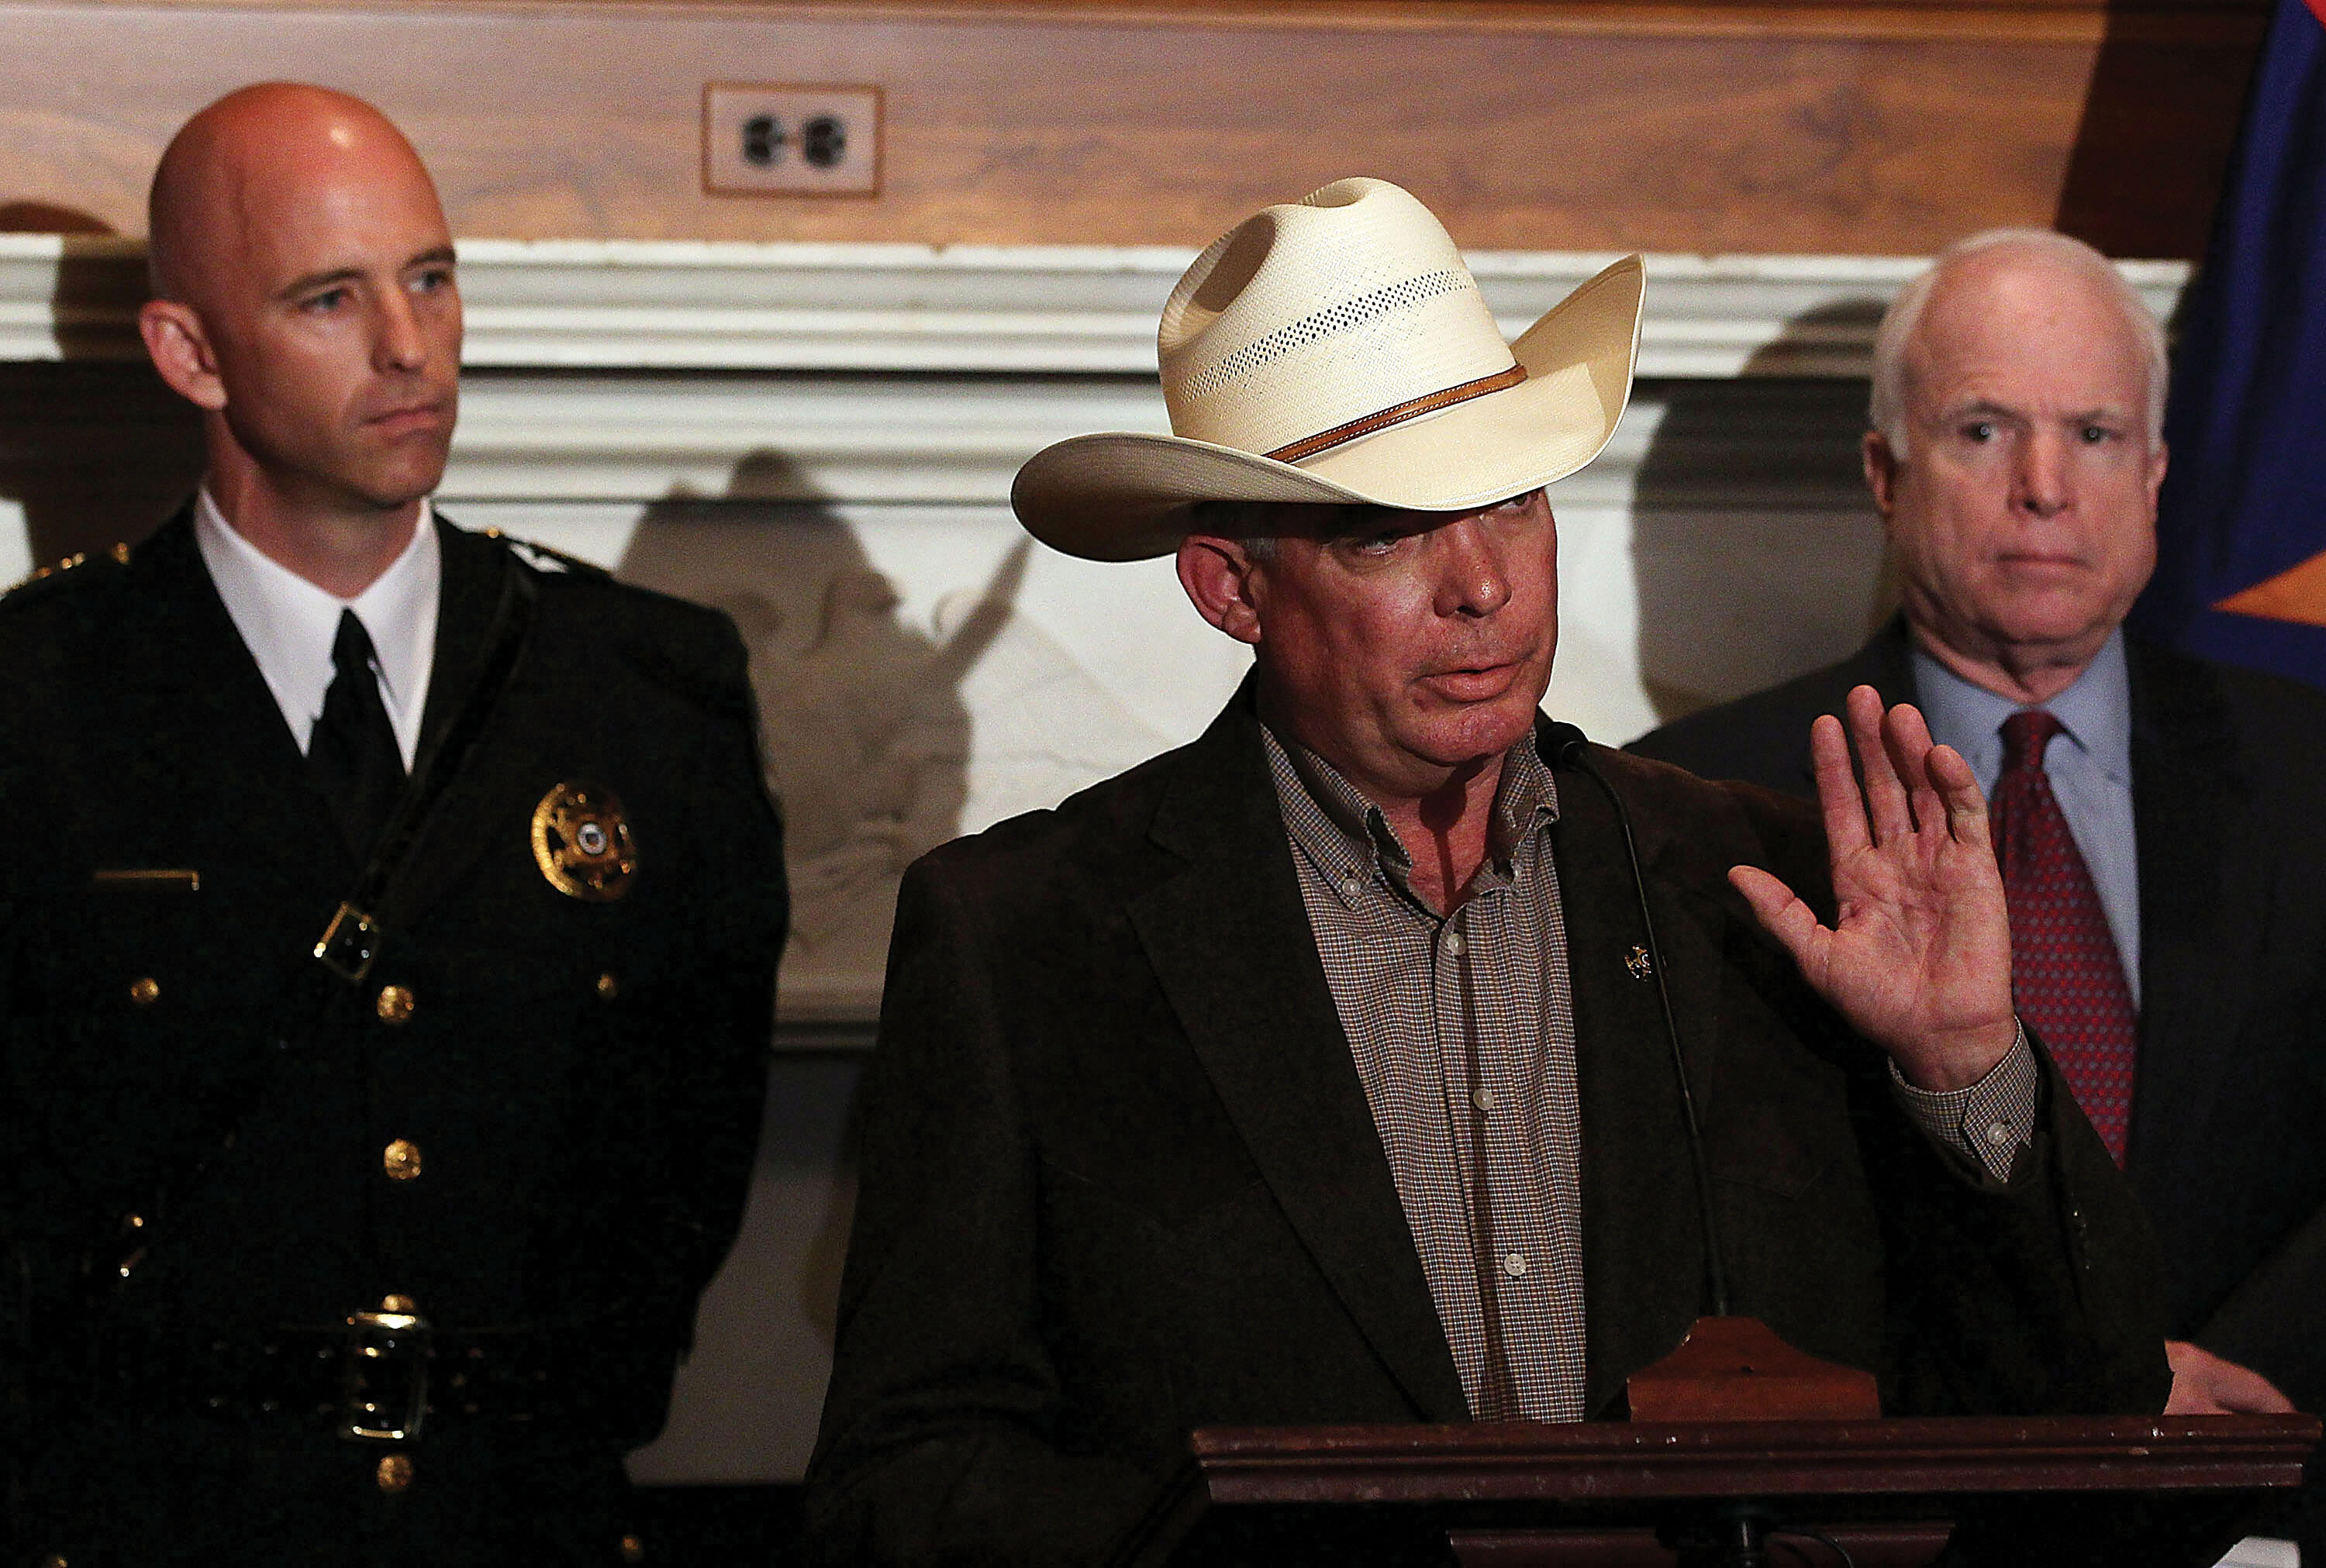 Senator John McCain and Arizona sheriffs Paul Babeu and Larry Dever hold a news conference on the border situation in Arizona. (Photo by Mark Wilson/Getty Images.)